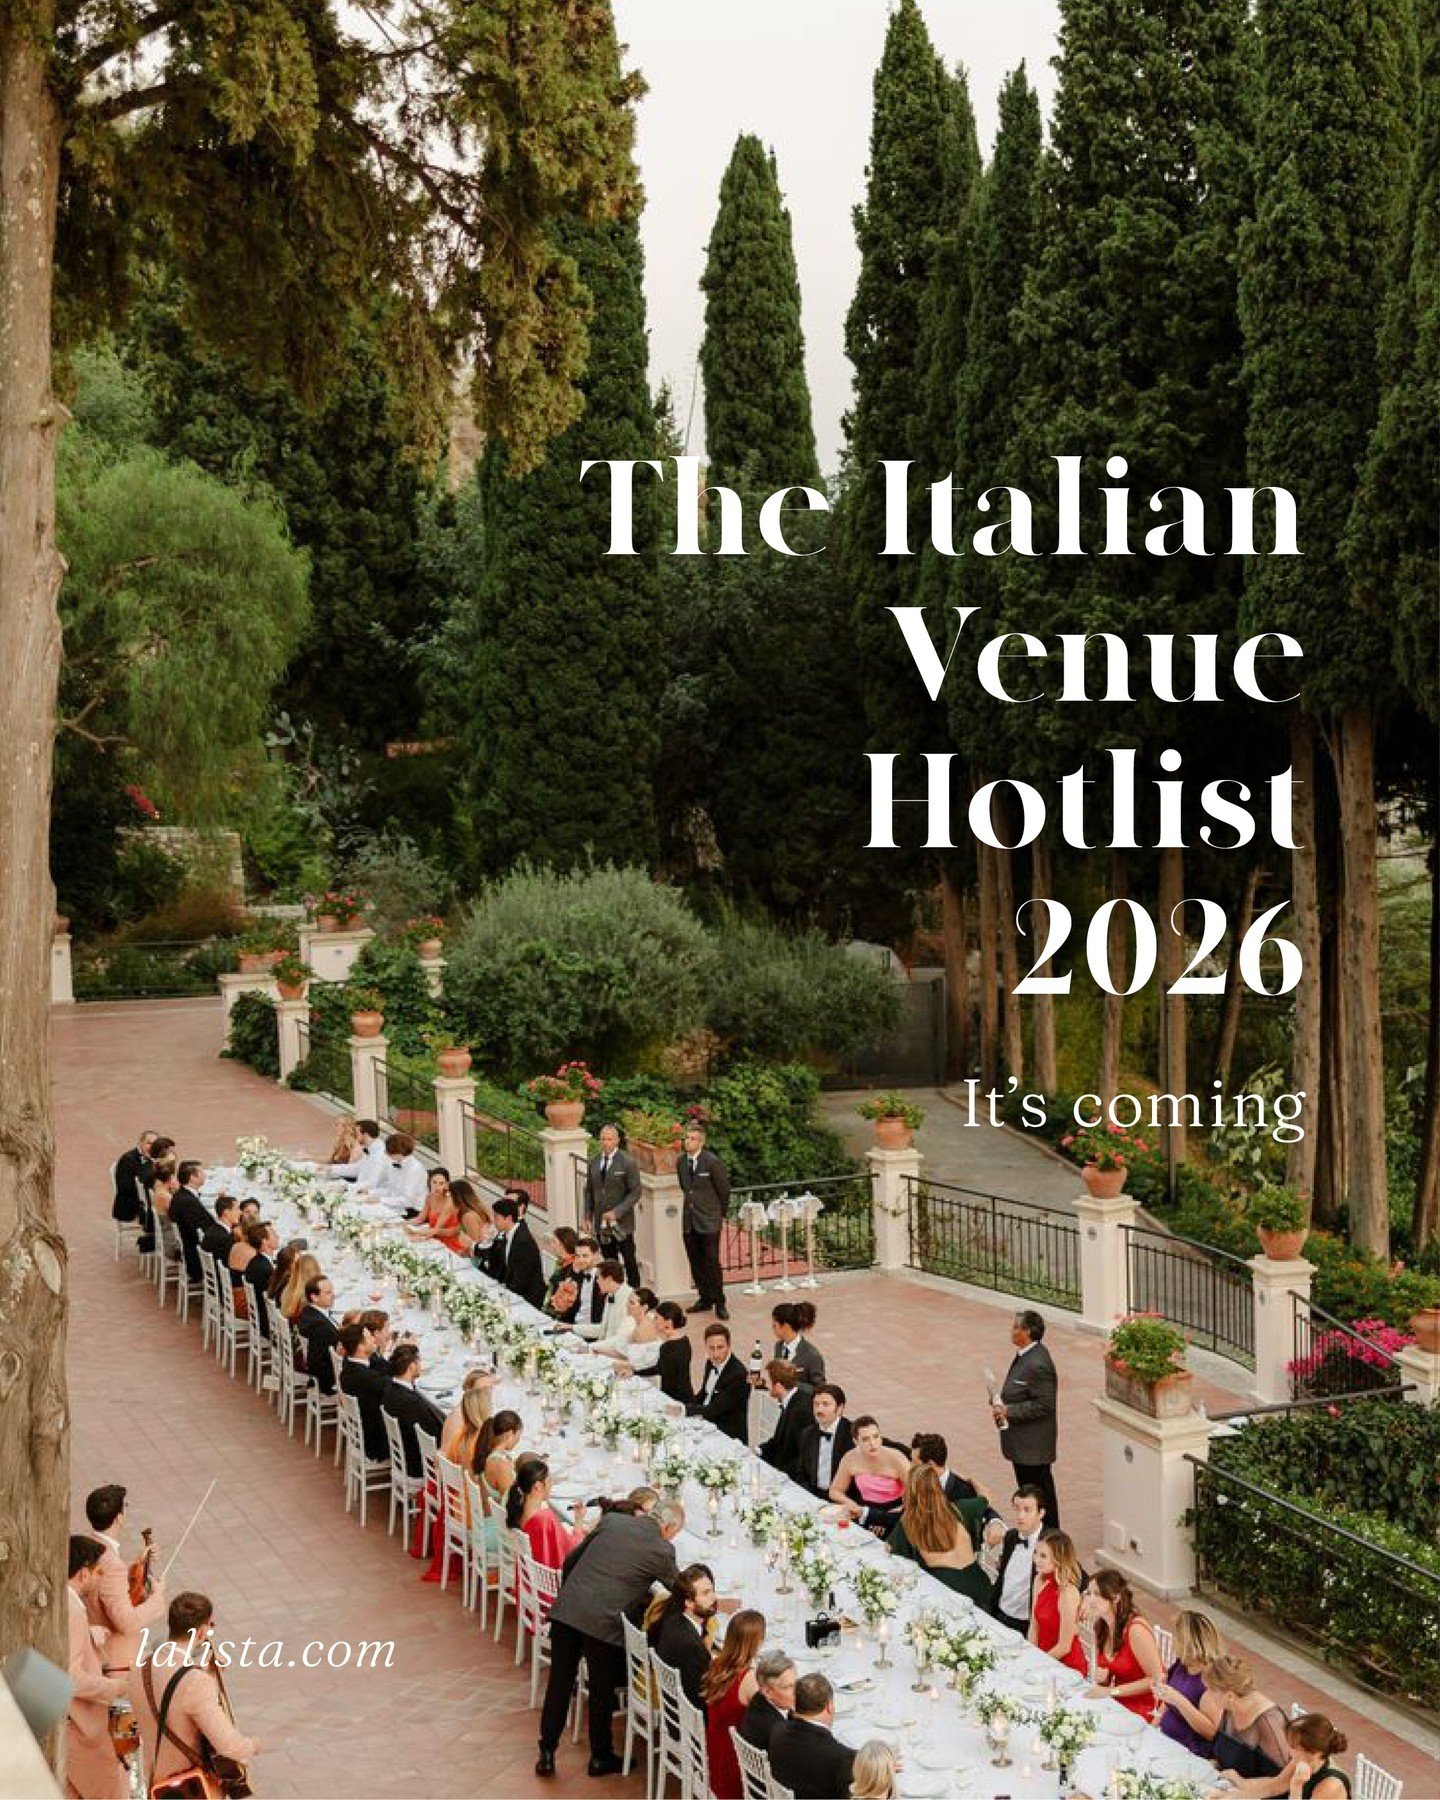 We know a stand-out venue when we see one💥 Be the first to receive THE ITALIAN VENUE HOTLIST 2026

Our annual Italian venue hotlist is coming! And we're SO excited to share it with you.

Make sure you're the first to get a copy by signing up to our 